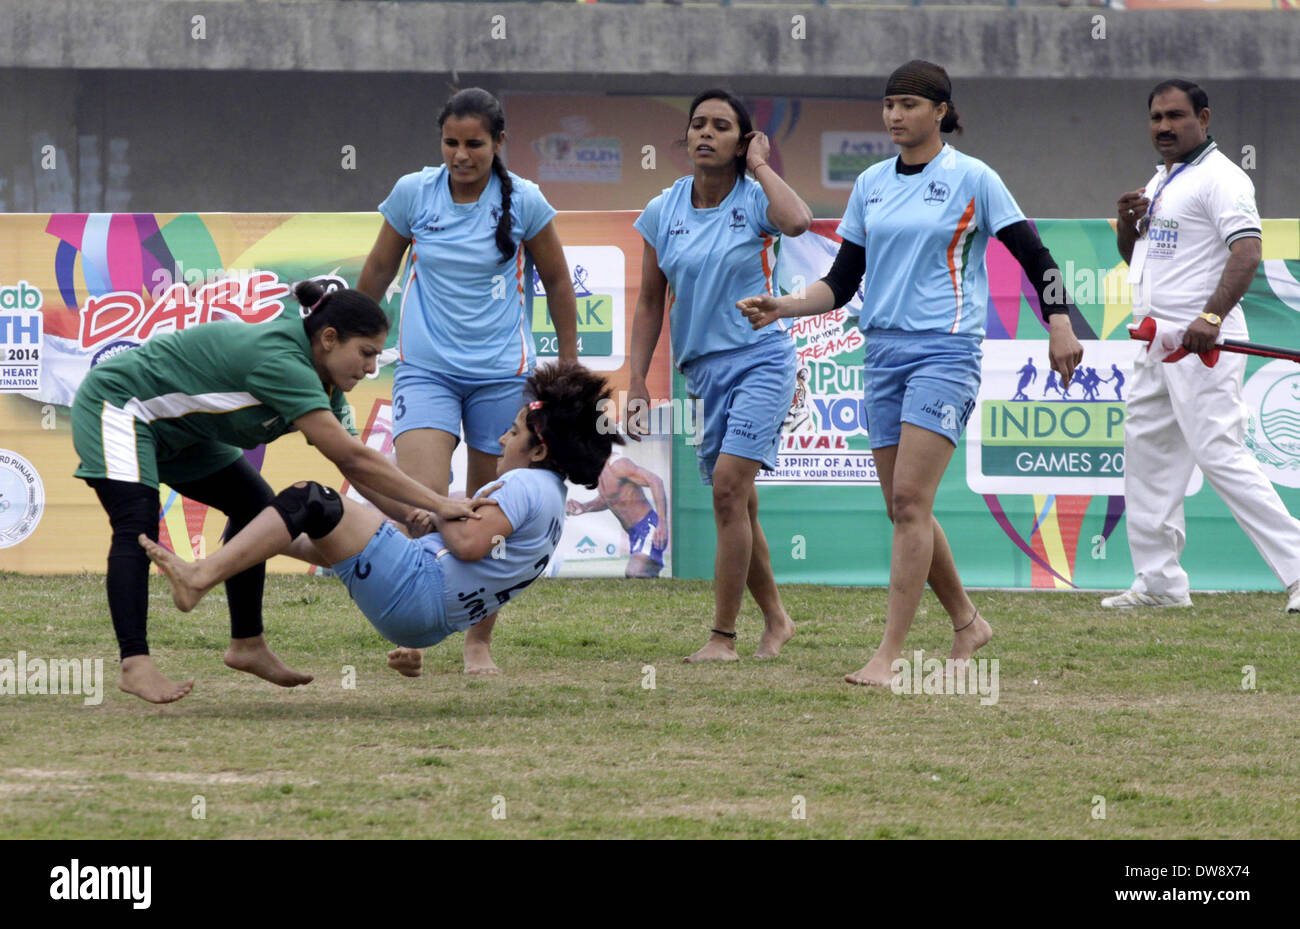 Lahore. 3rd Mar, 2014. A Pakistan kabaddi player (L) tackles an Indian opponent during a Punjab Youth Festival kabaddi match in eastern Pakistan's Lahore on March 3, 2014. India won the match against Pakistan, scoring 38-15. © Sajjad/Xinhua/Alamy Live News Stock Photo